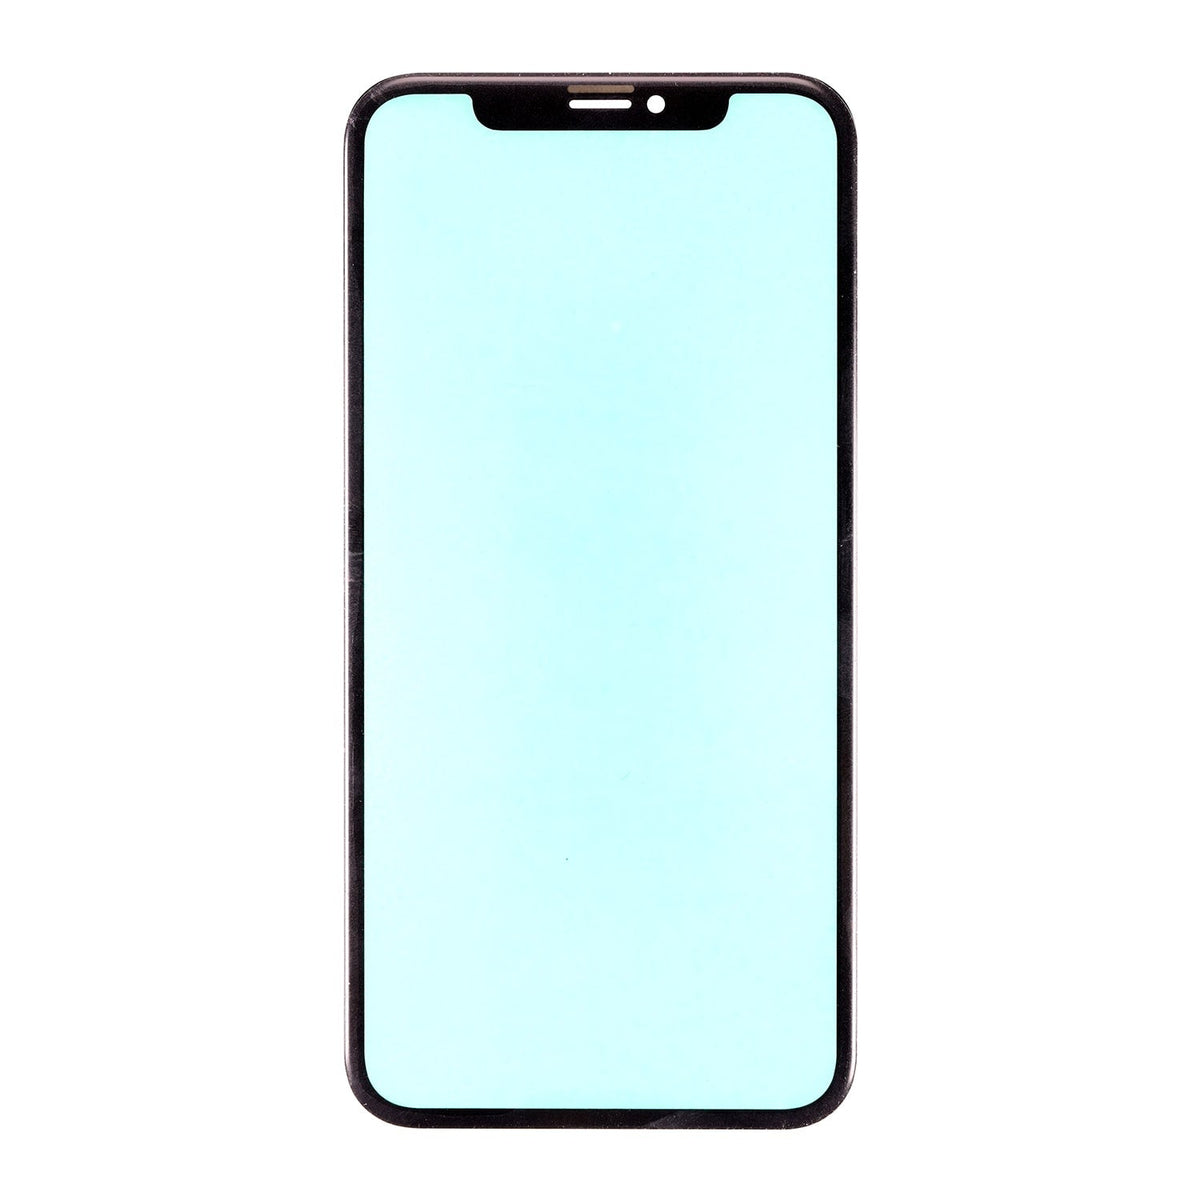 BLACK FRONT GLASS LENS FOR IPHONE XR